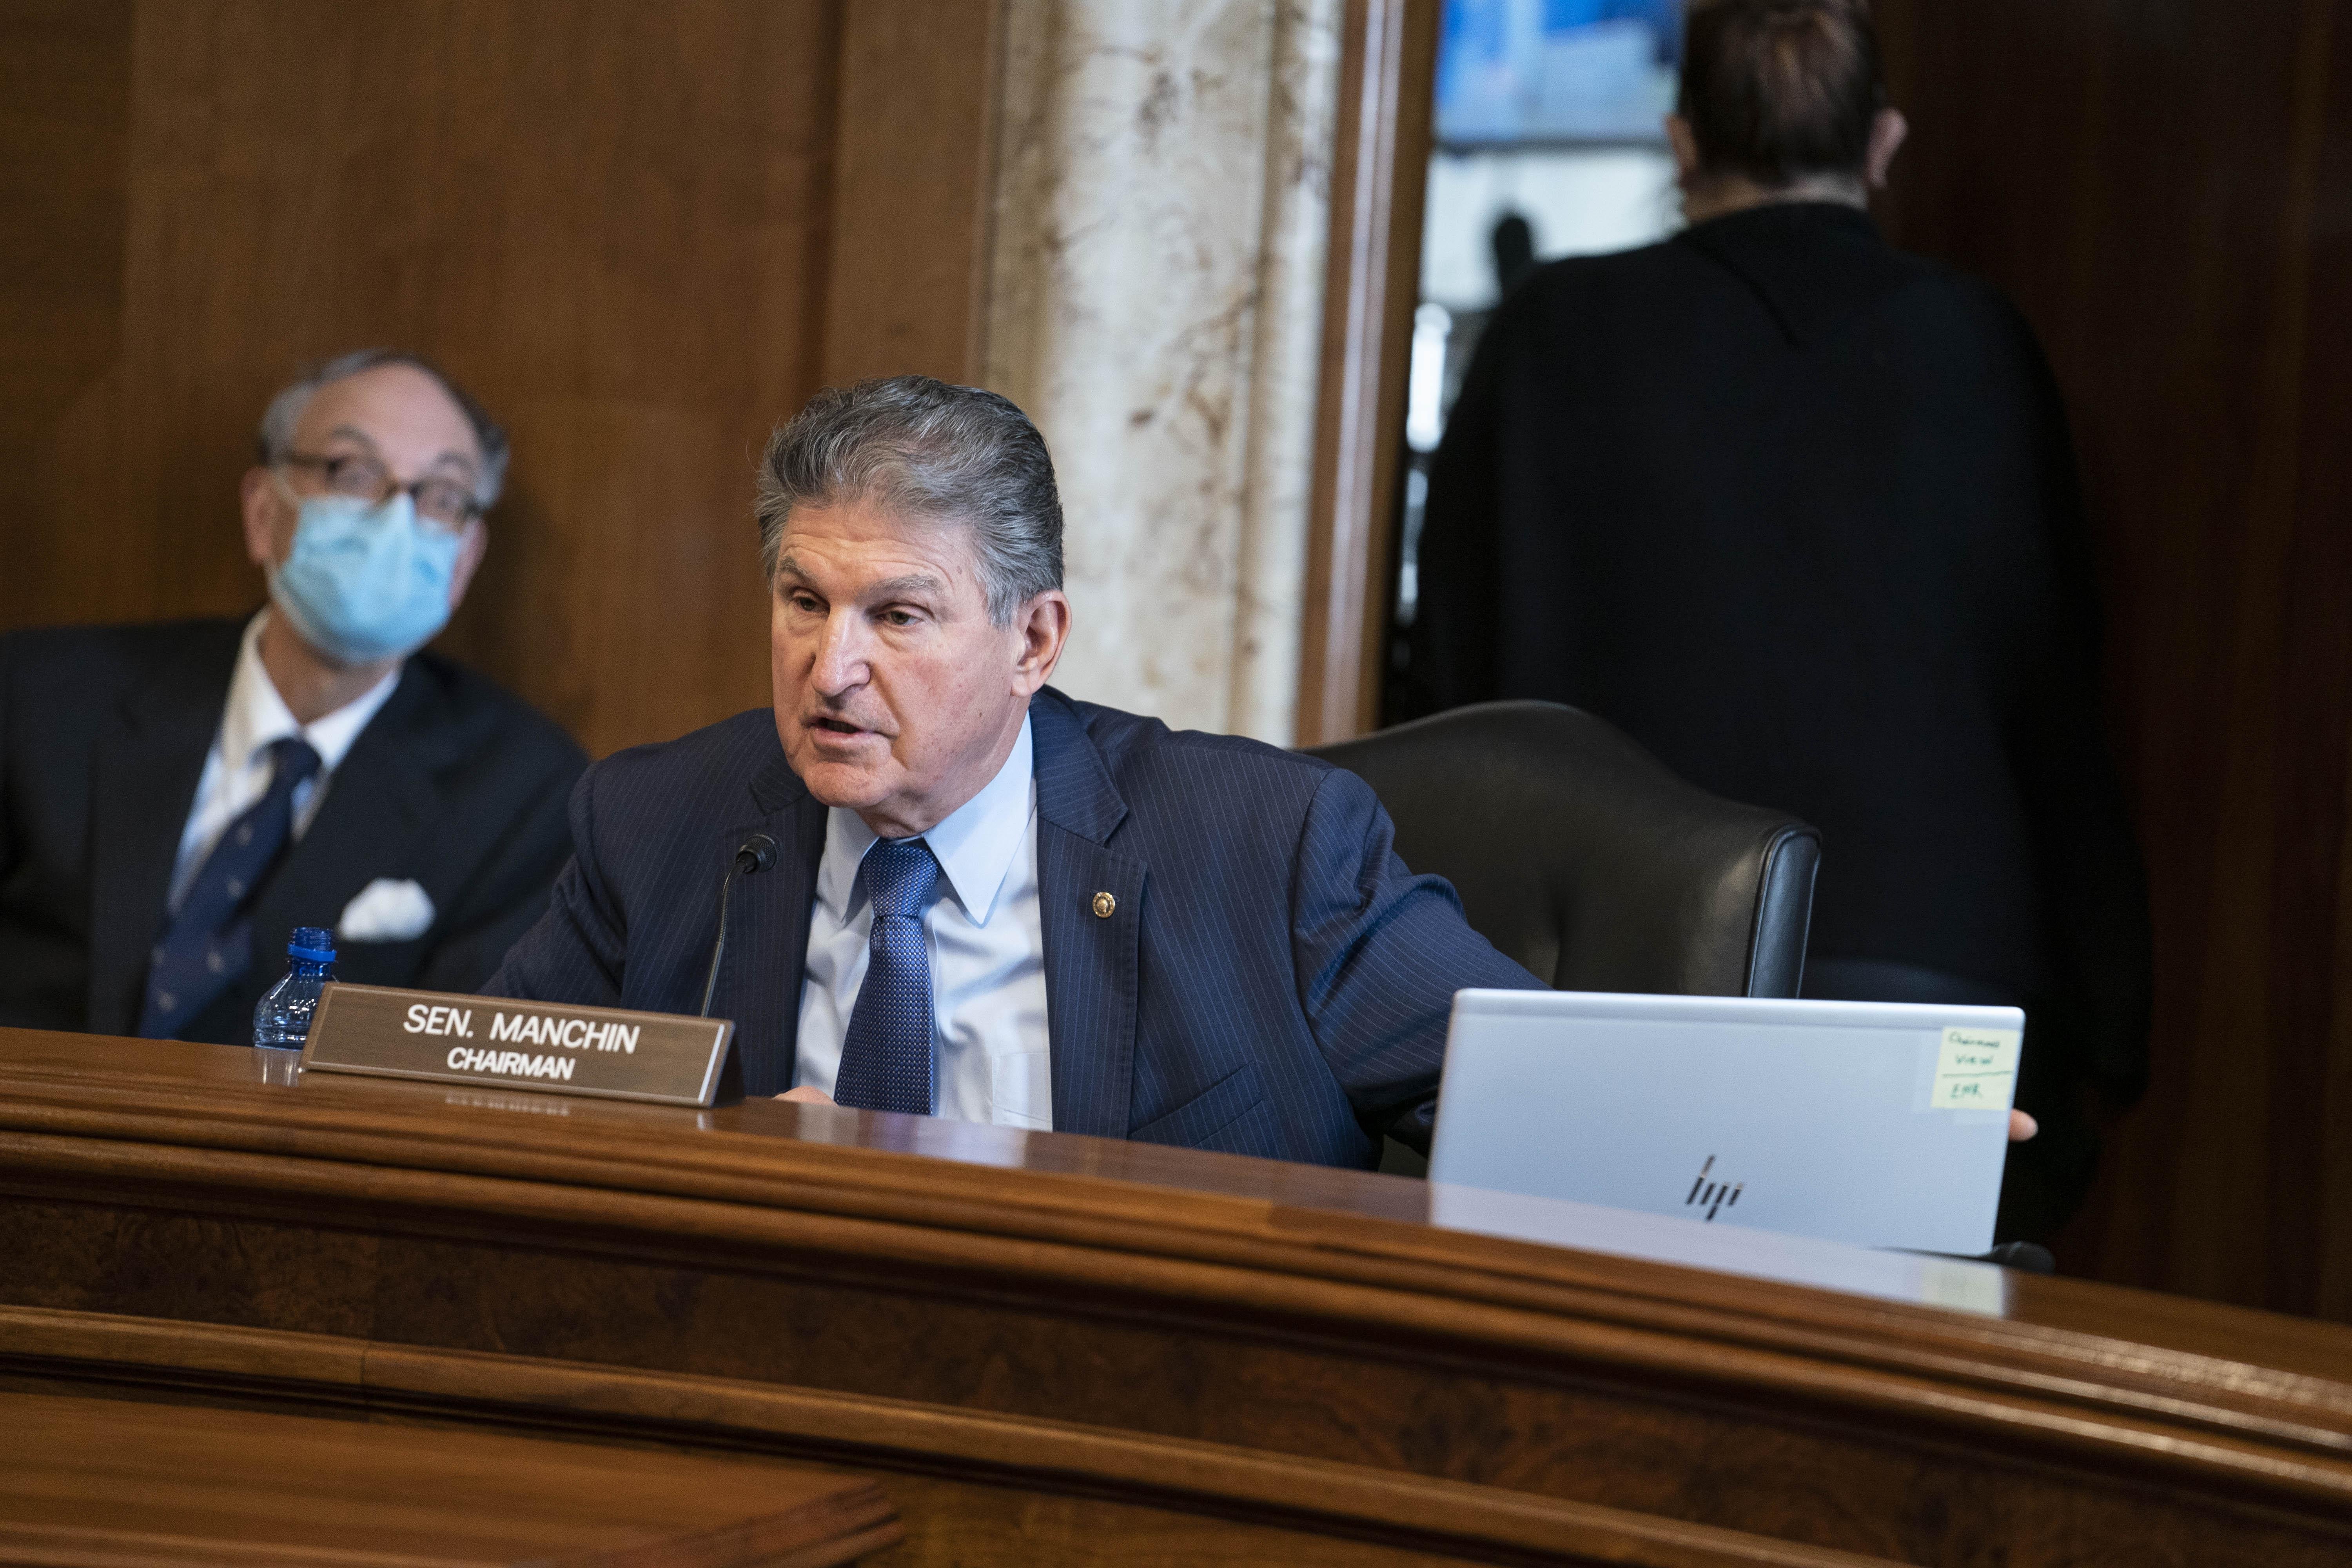 Joe Manchin seated in front of his nameplate